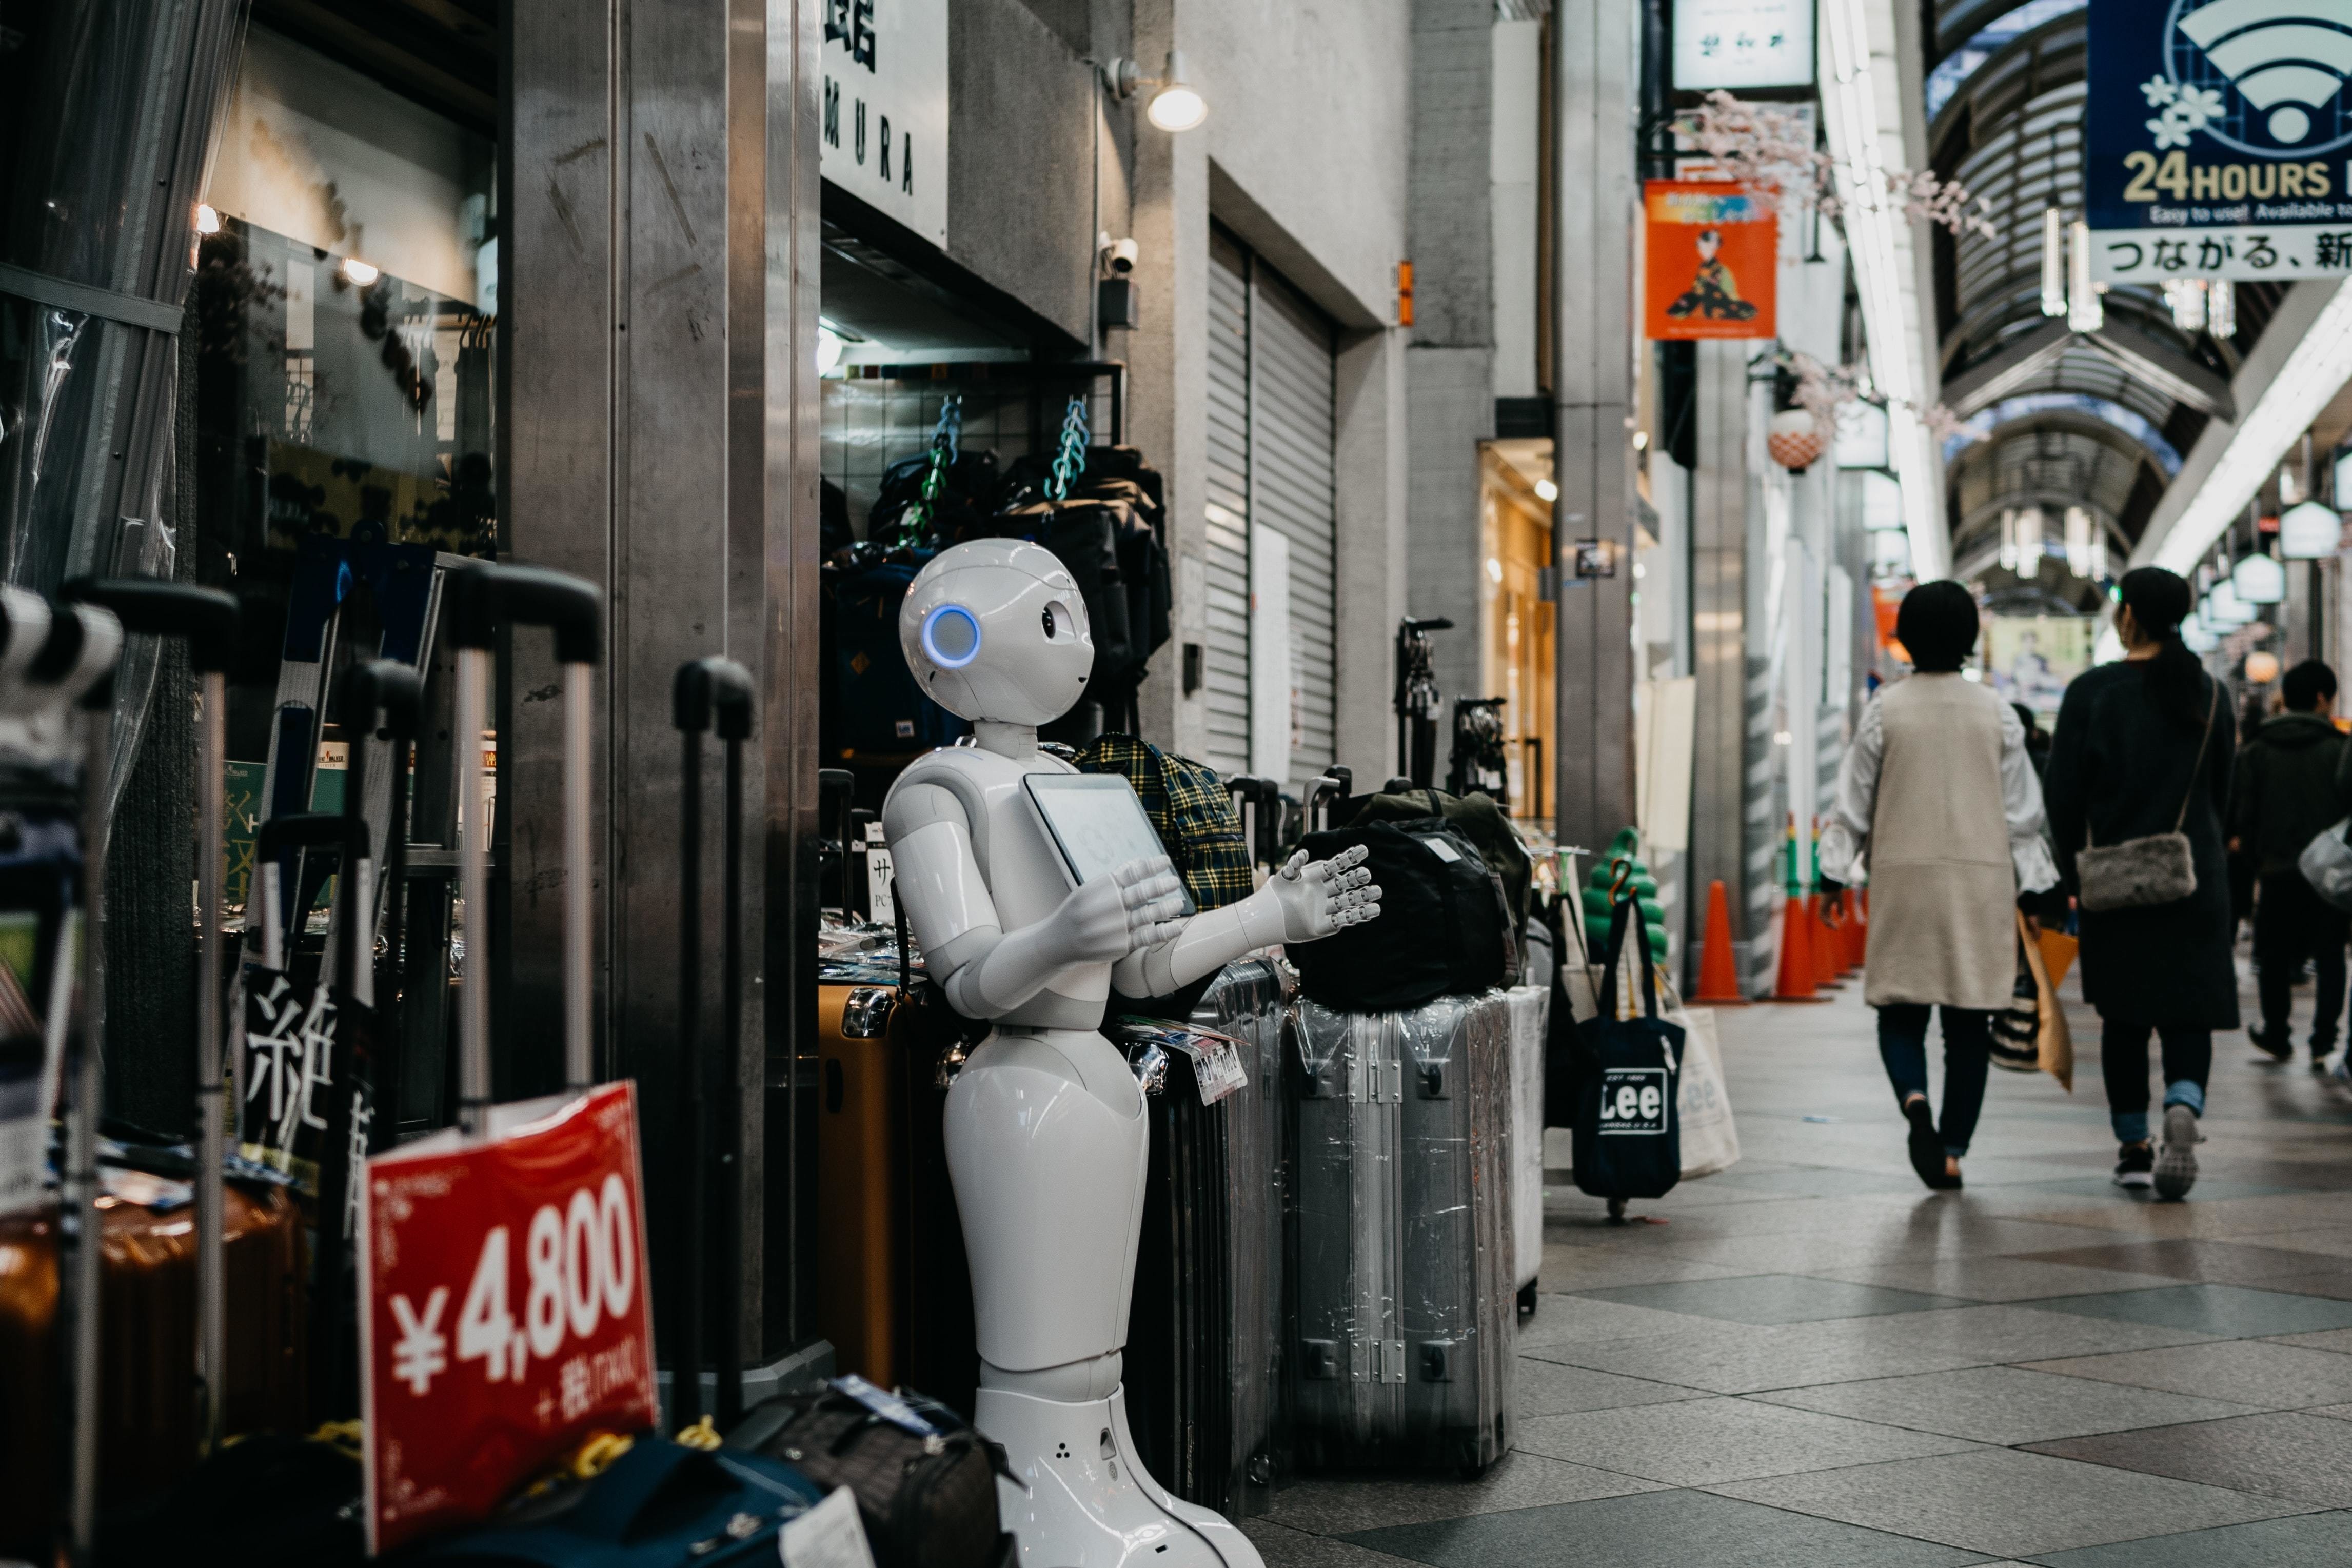 An artificial intelligence robot at a mall in Japan.